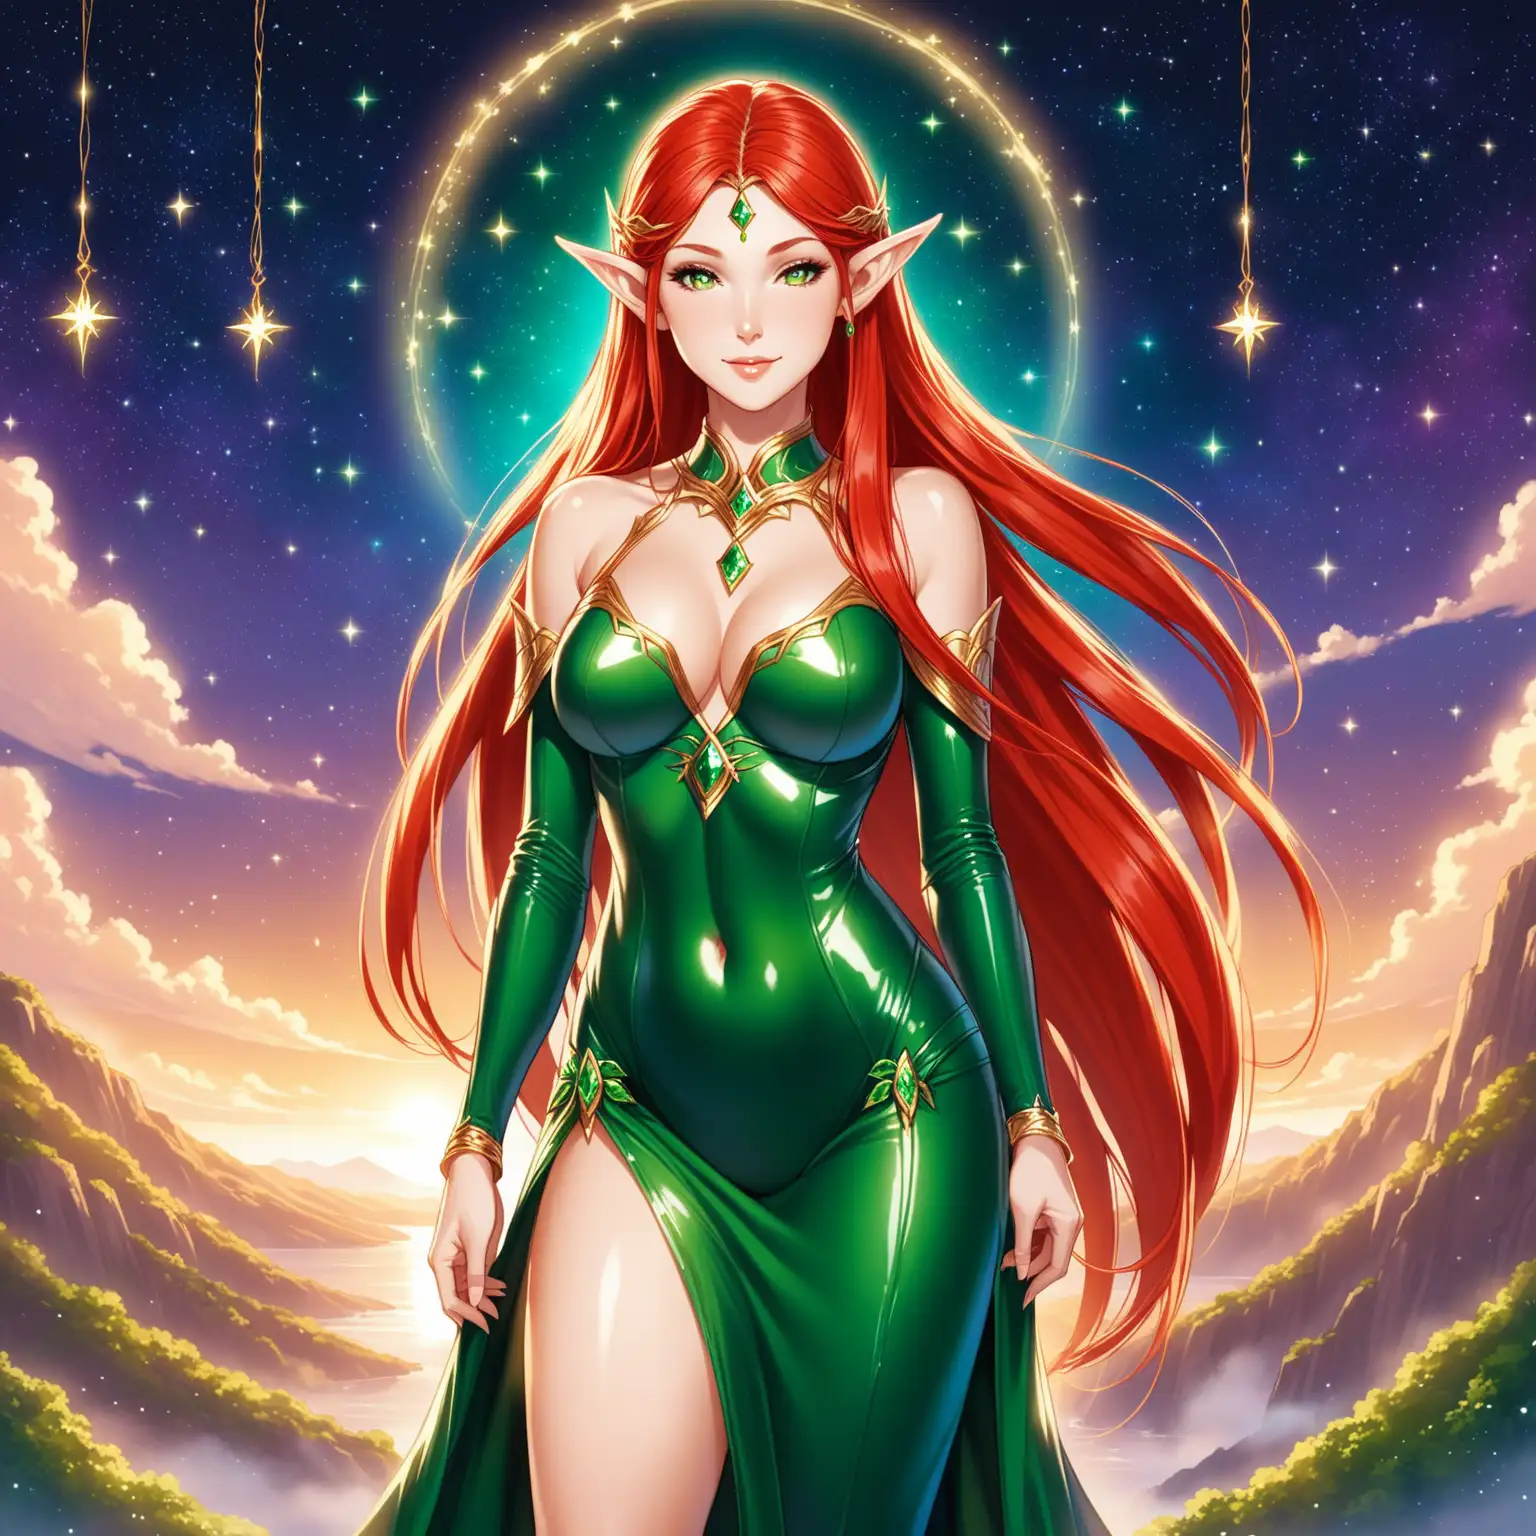 Elegant Goddess of the Elves in Hunter Green Latex Dress and Emerald Jewelry